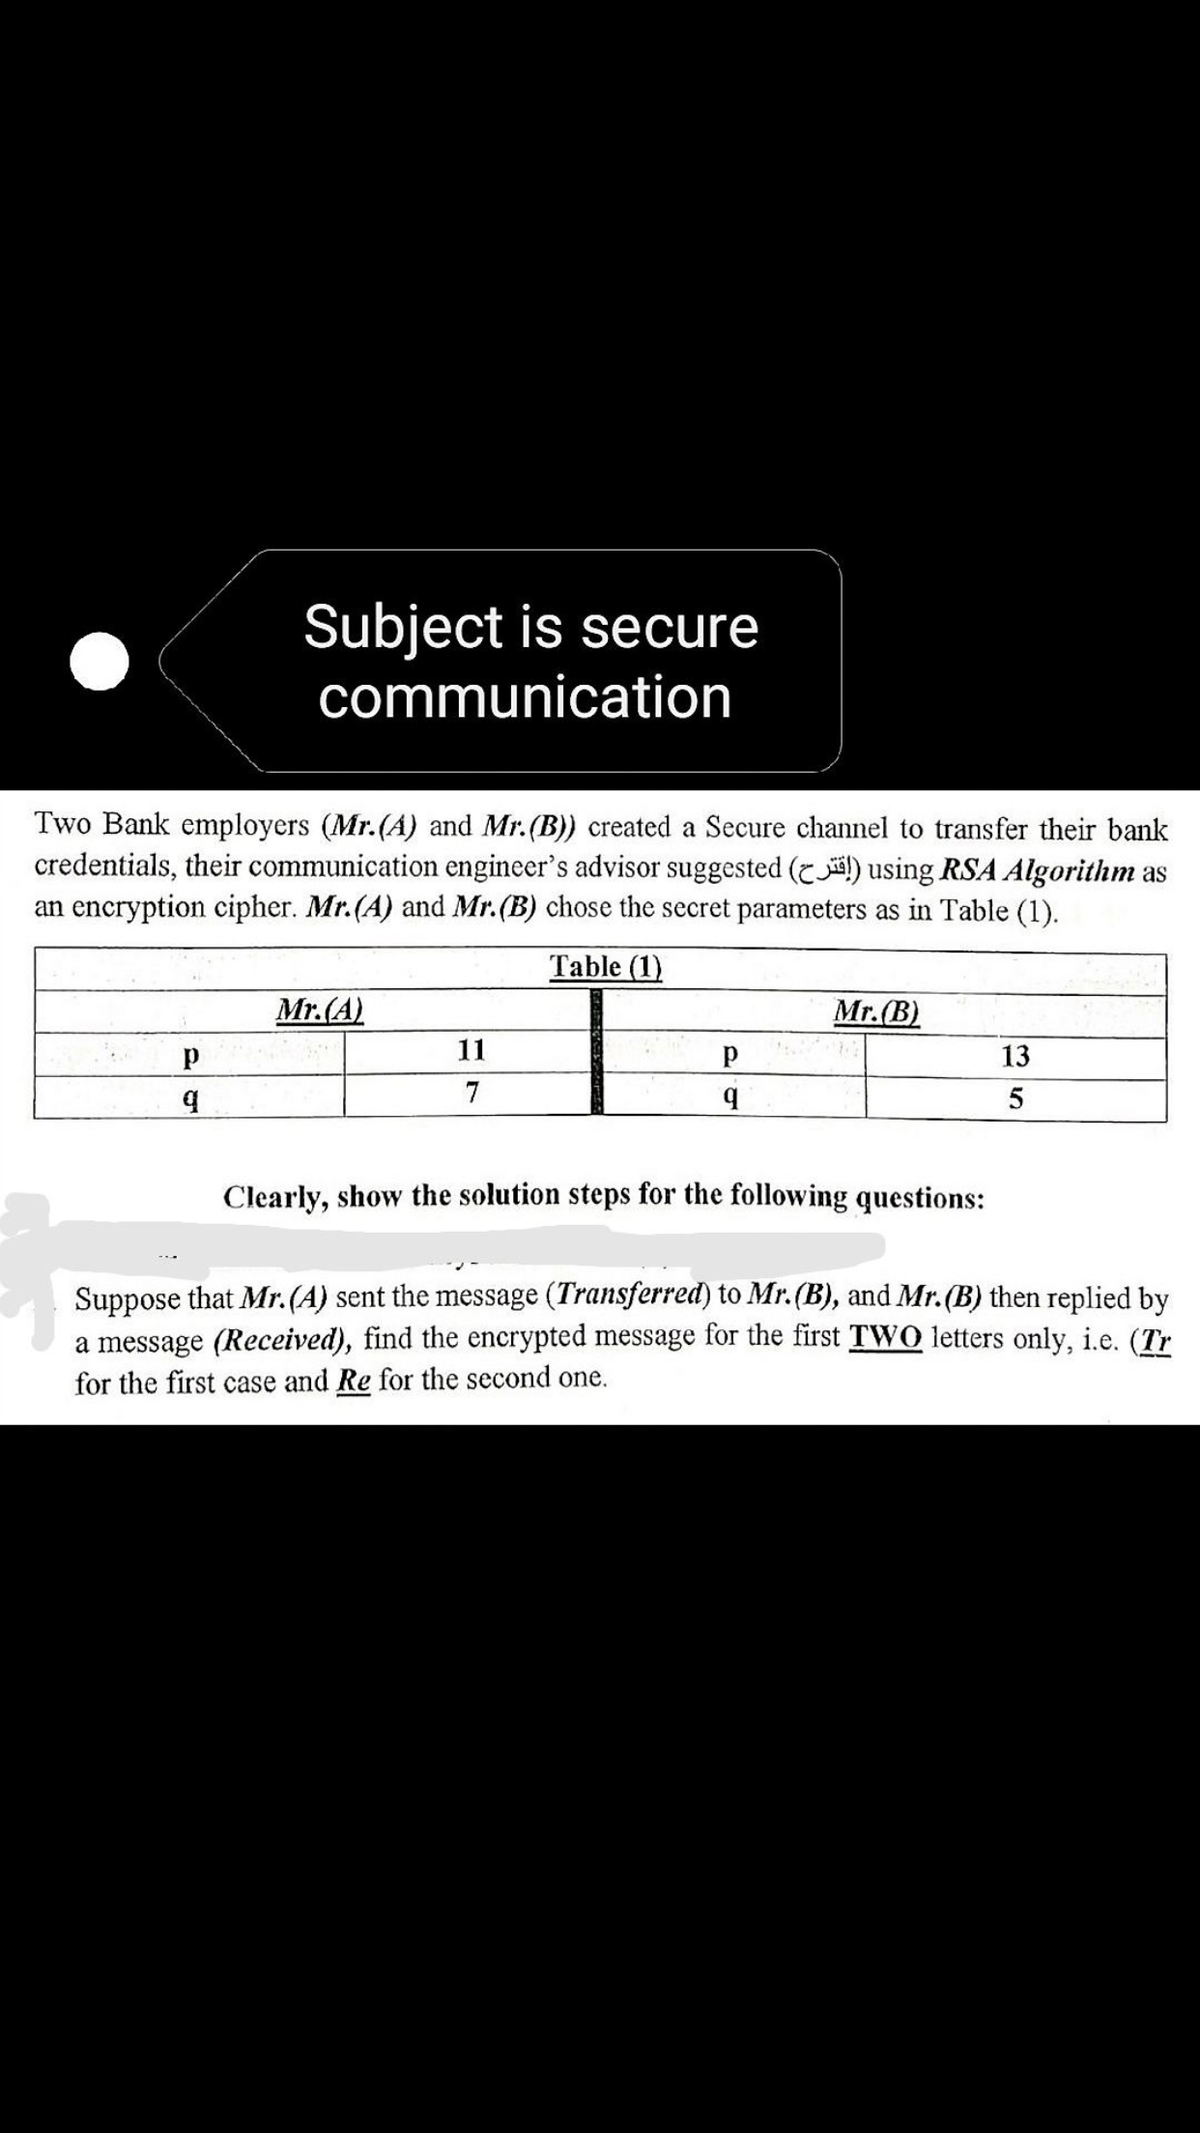 Subject is secure
communication
Two Bank employers (Mr.(A) and Mr.(B)) created a Secure channel to transfer their bank
credentials, their communication engineer's advisor suggested (!) using RSA Algorithm as
an encryption cipher. Mr.(A) and Mr.(B) chose the secret parameters as in Table (1).
Table (1)
Mr.(A)
Mr.(B)
11
13
7
Clearly, show the solution steps for the following questions:
Suppose that Mr.(A) sent the message (Transferred) to Mr.(B), and Mr.(B) then replied by
a message (Received), find the encrypted message for the first TWO letters only, i.e. (Tr
for the first case and Re for the second one.
